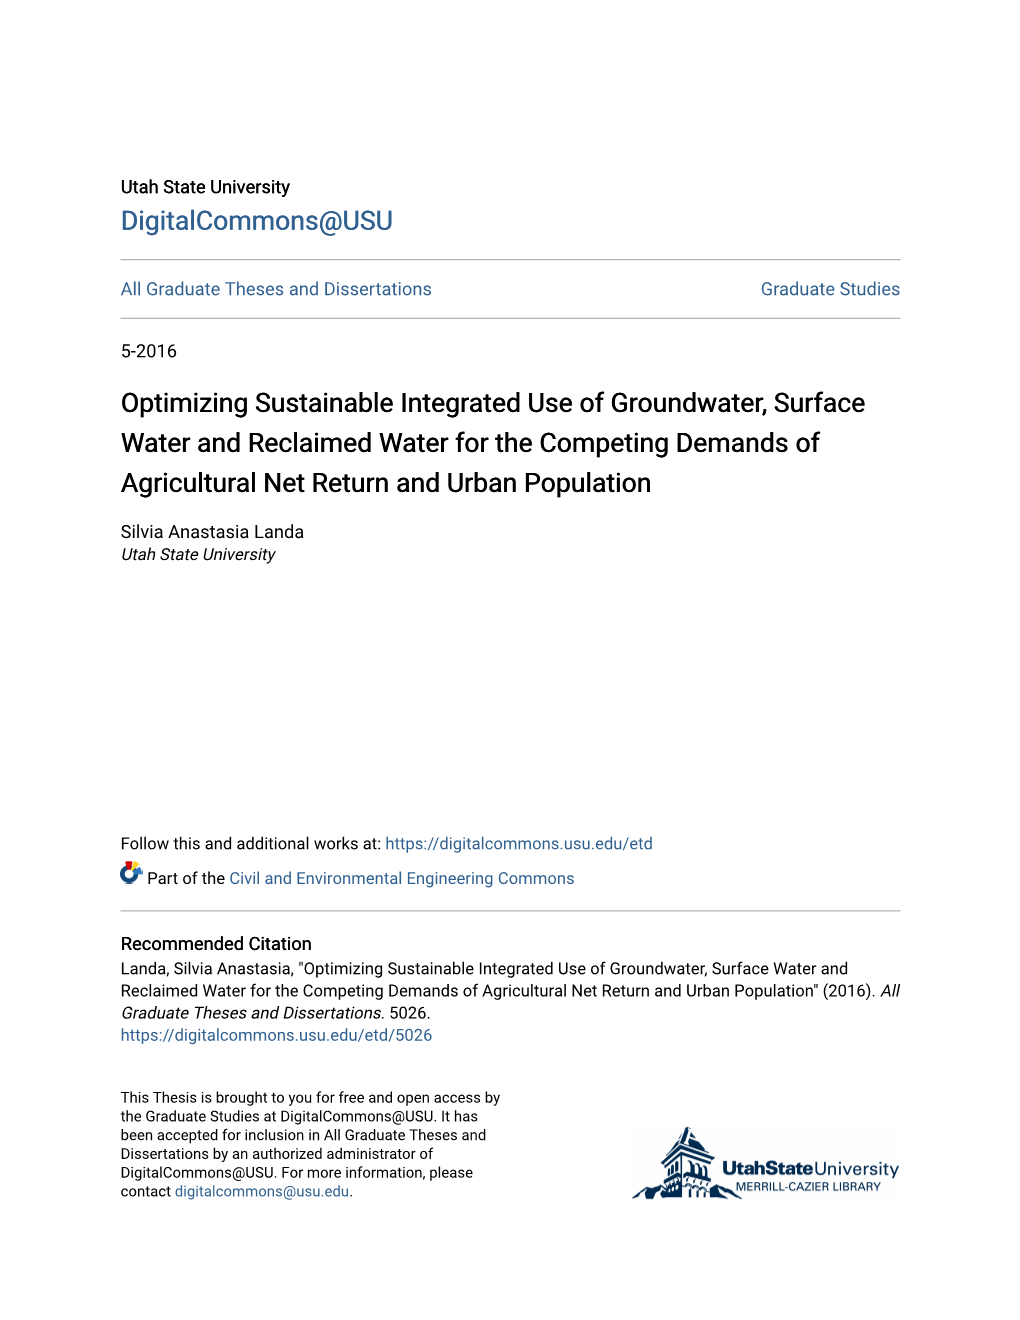 Optimizing Sustainable Integrated Use of Groundwater, Surface Water and Reclaimed Water for the Competing Demands of Agricultural Net Return and Urban Population